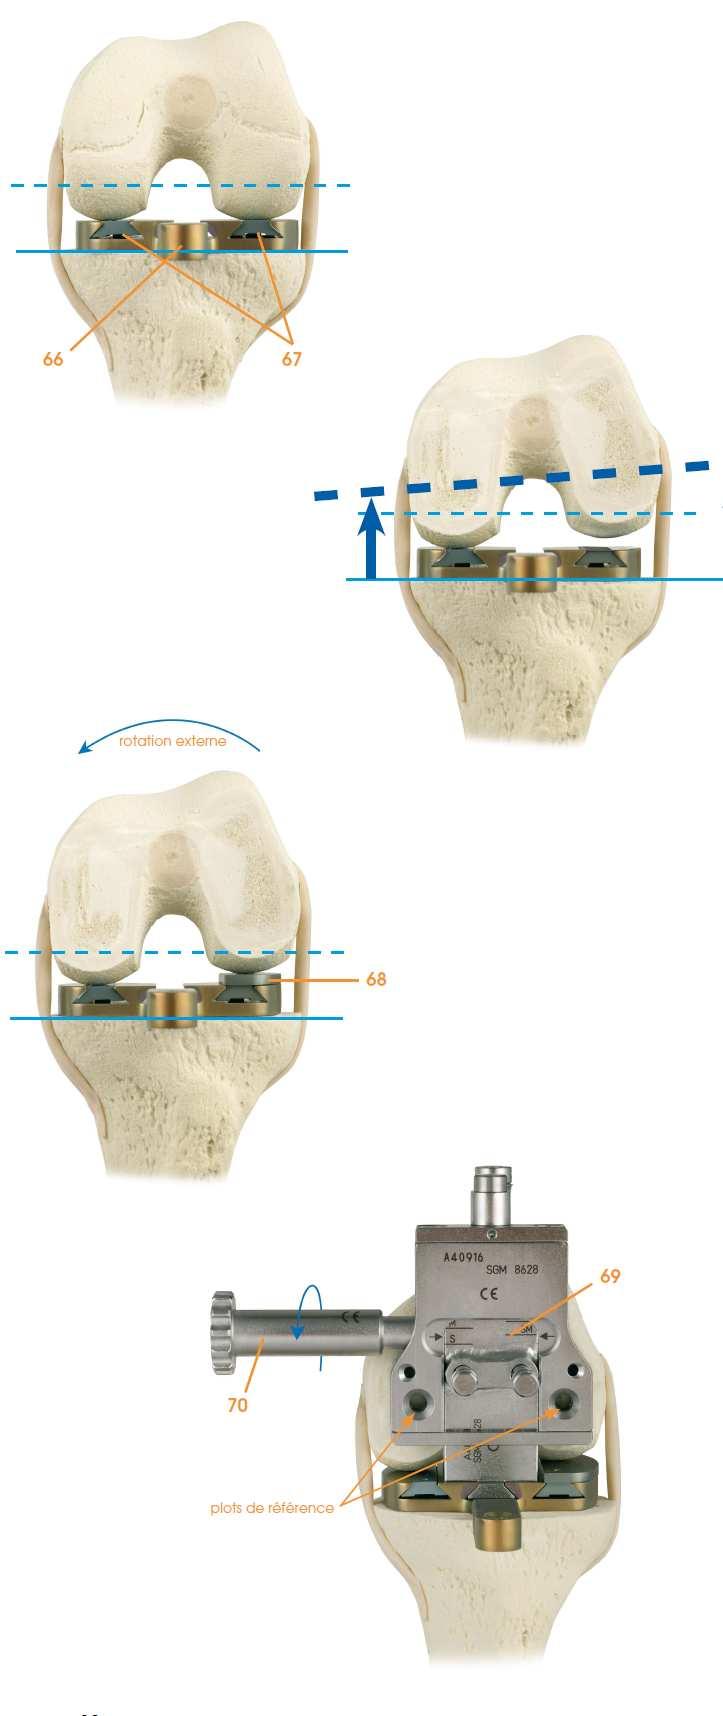 Possible determination of an external rotation of the femoral part via the rotation wedge (31) placed under the external condyle.